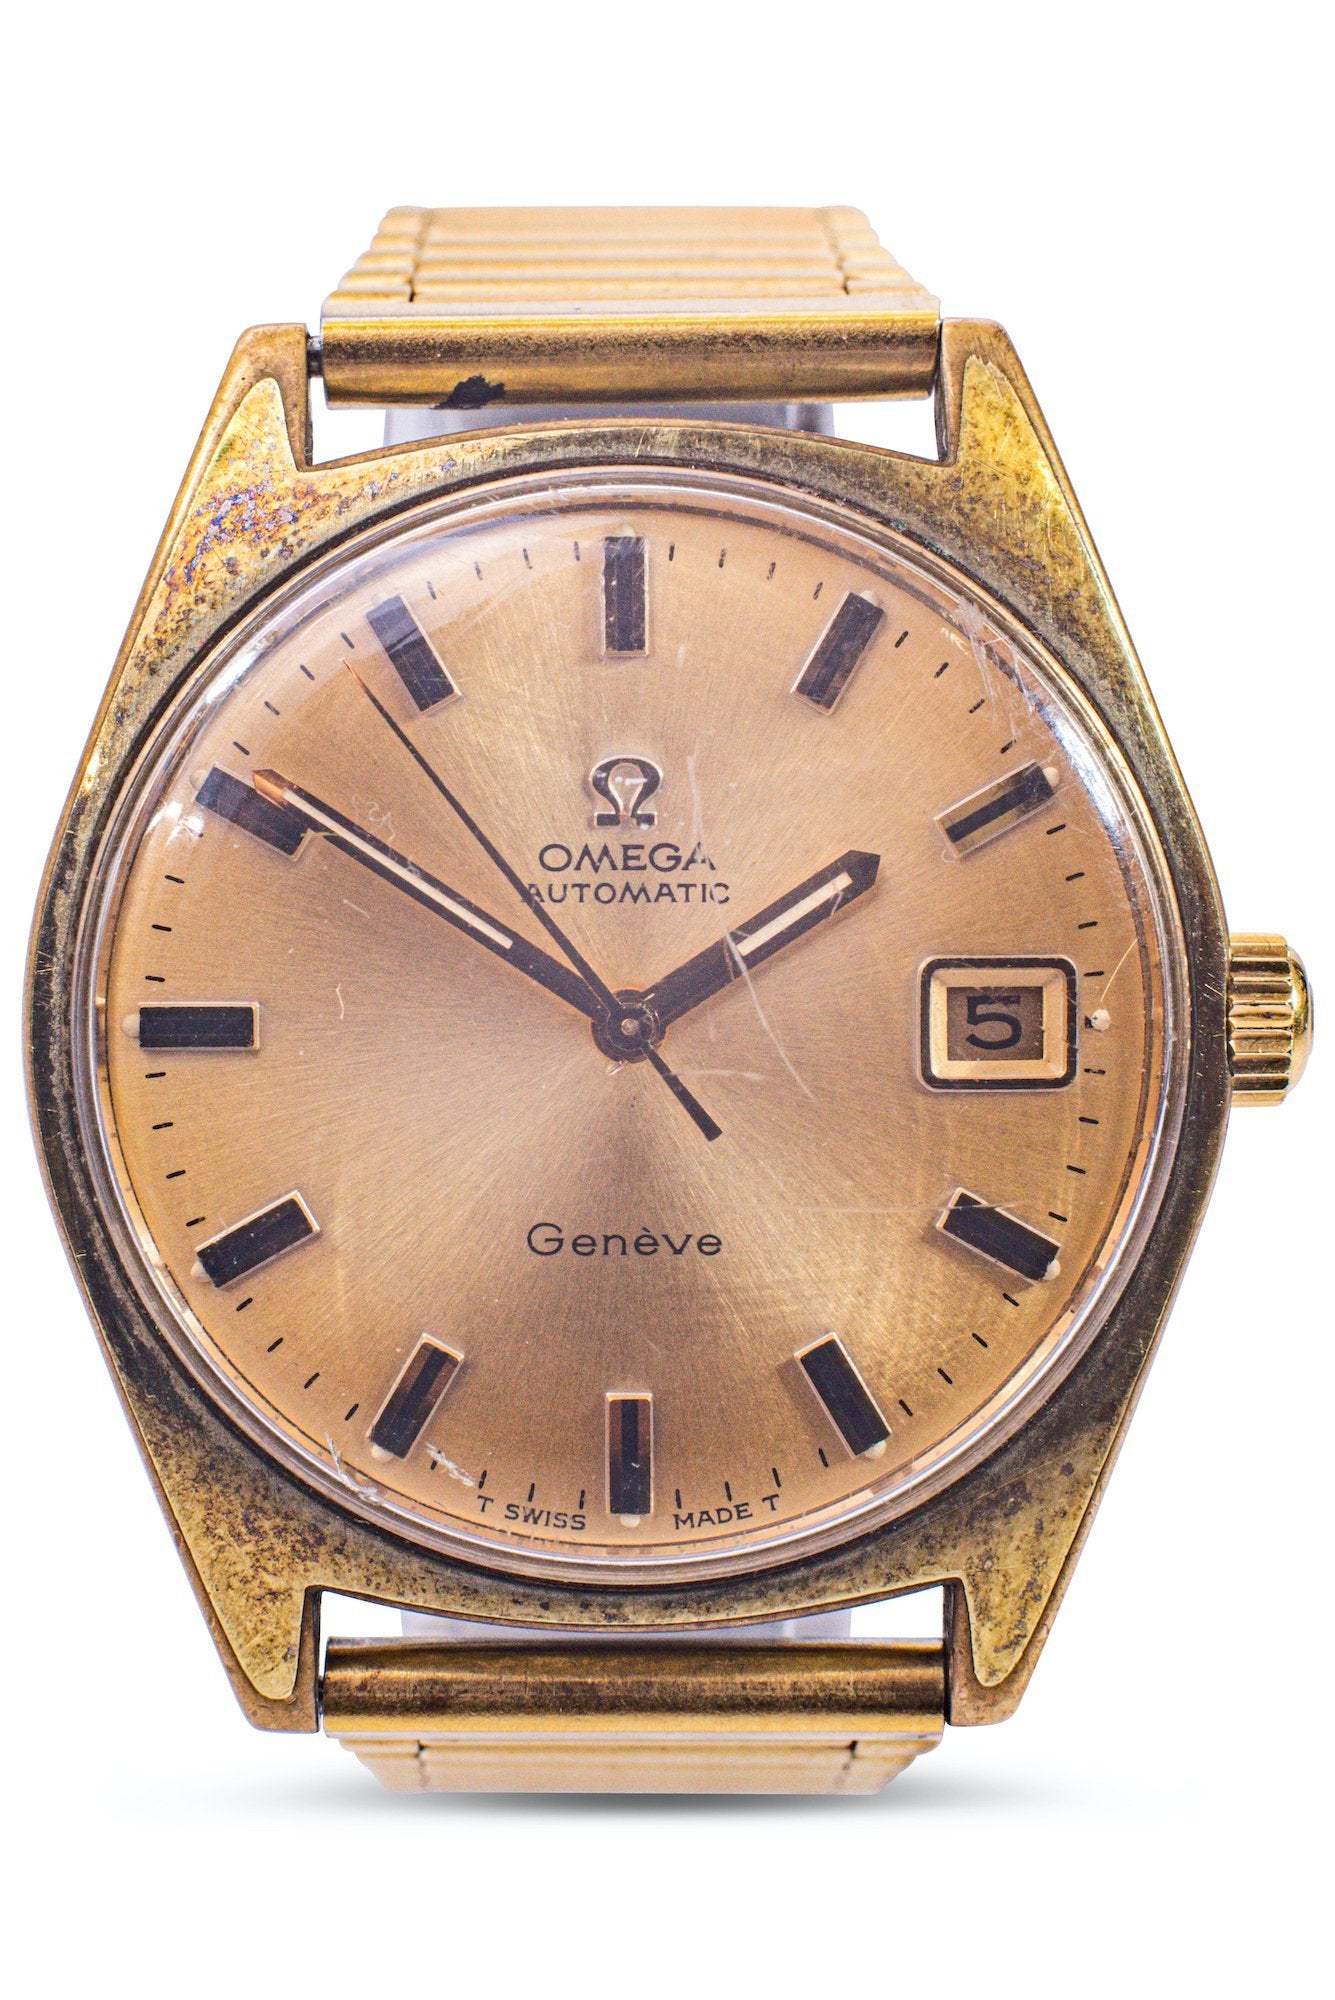 Omega Geneve - Counting Time Watch Purveyors